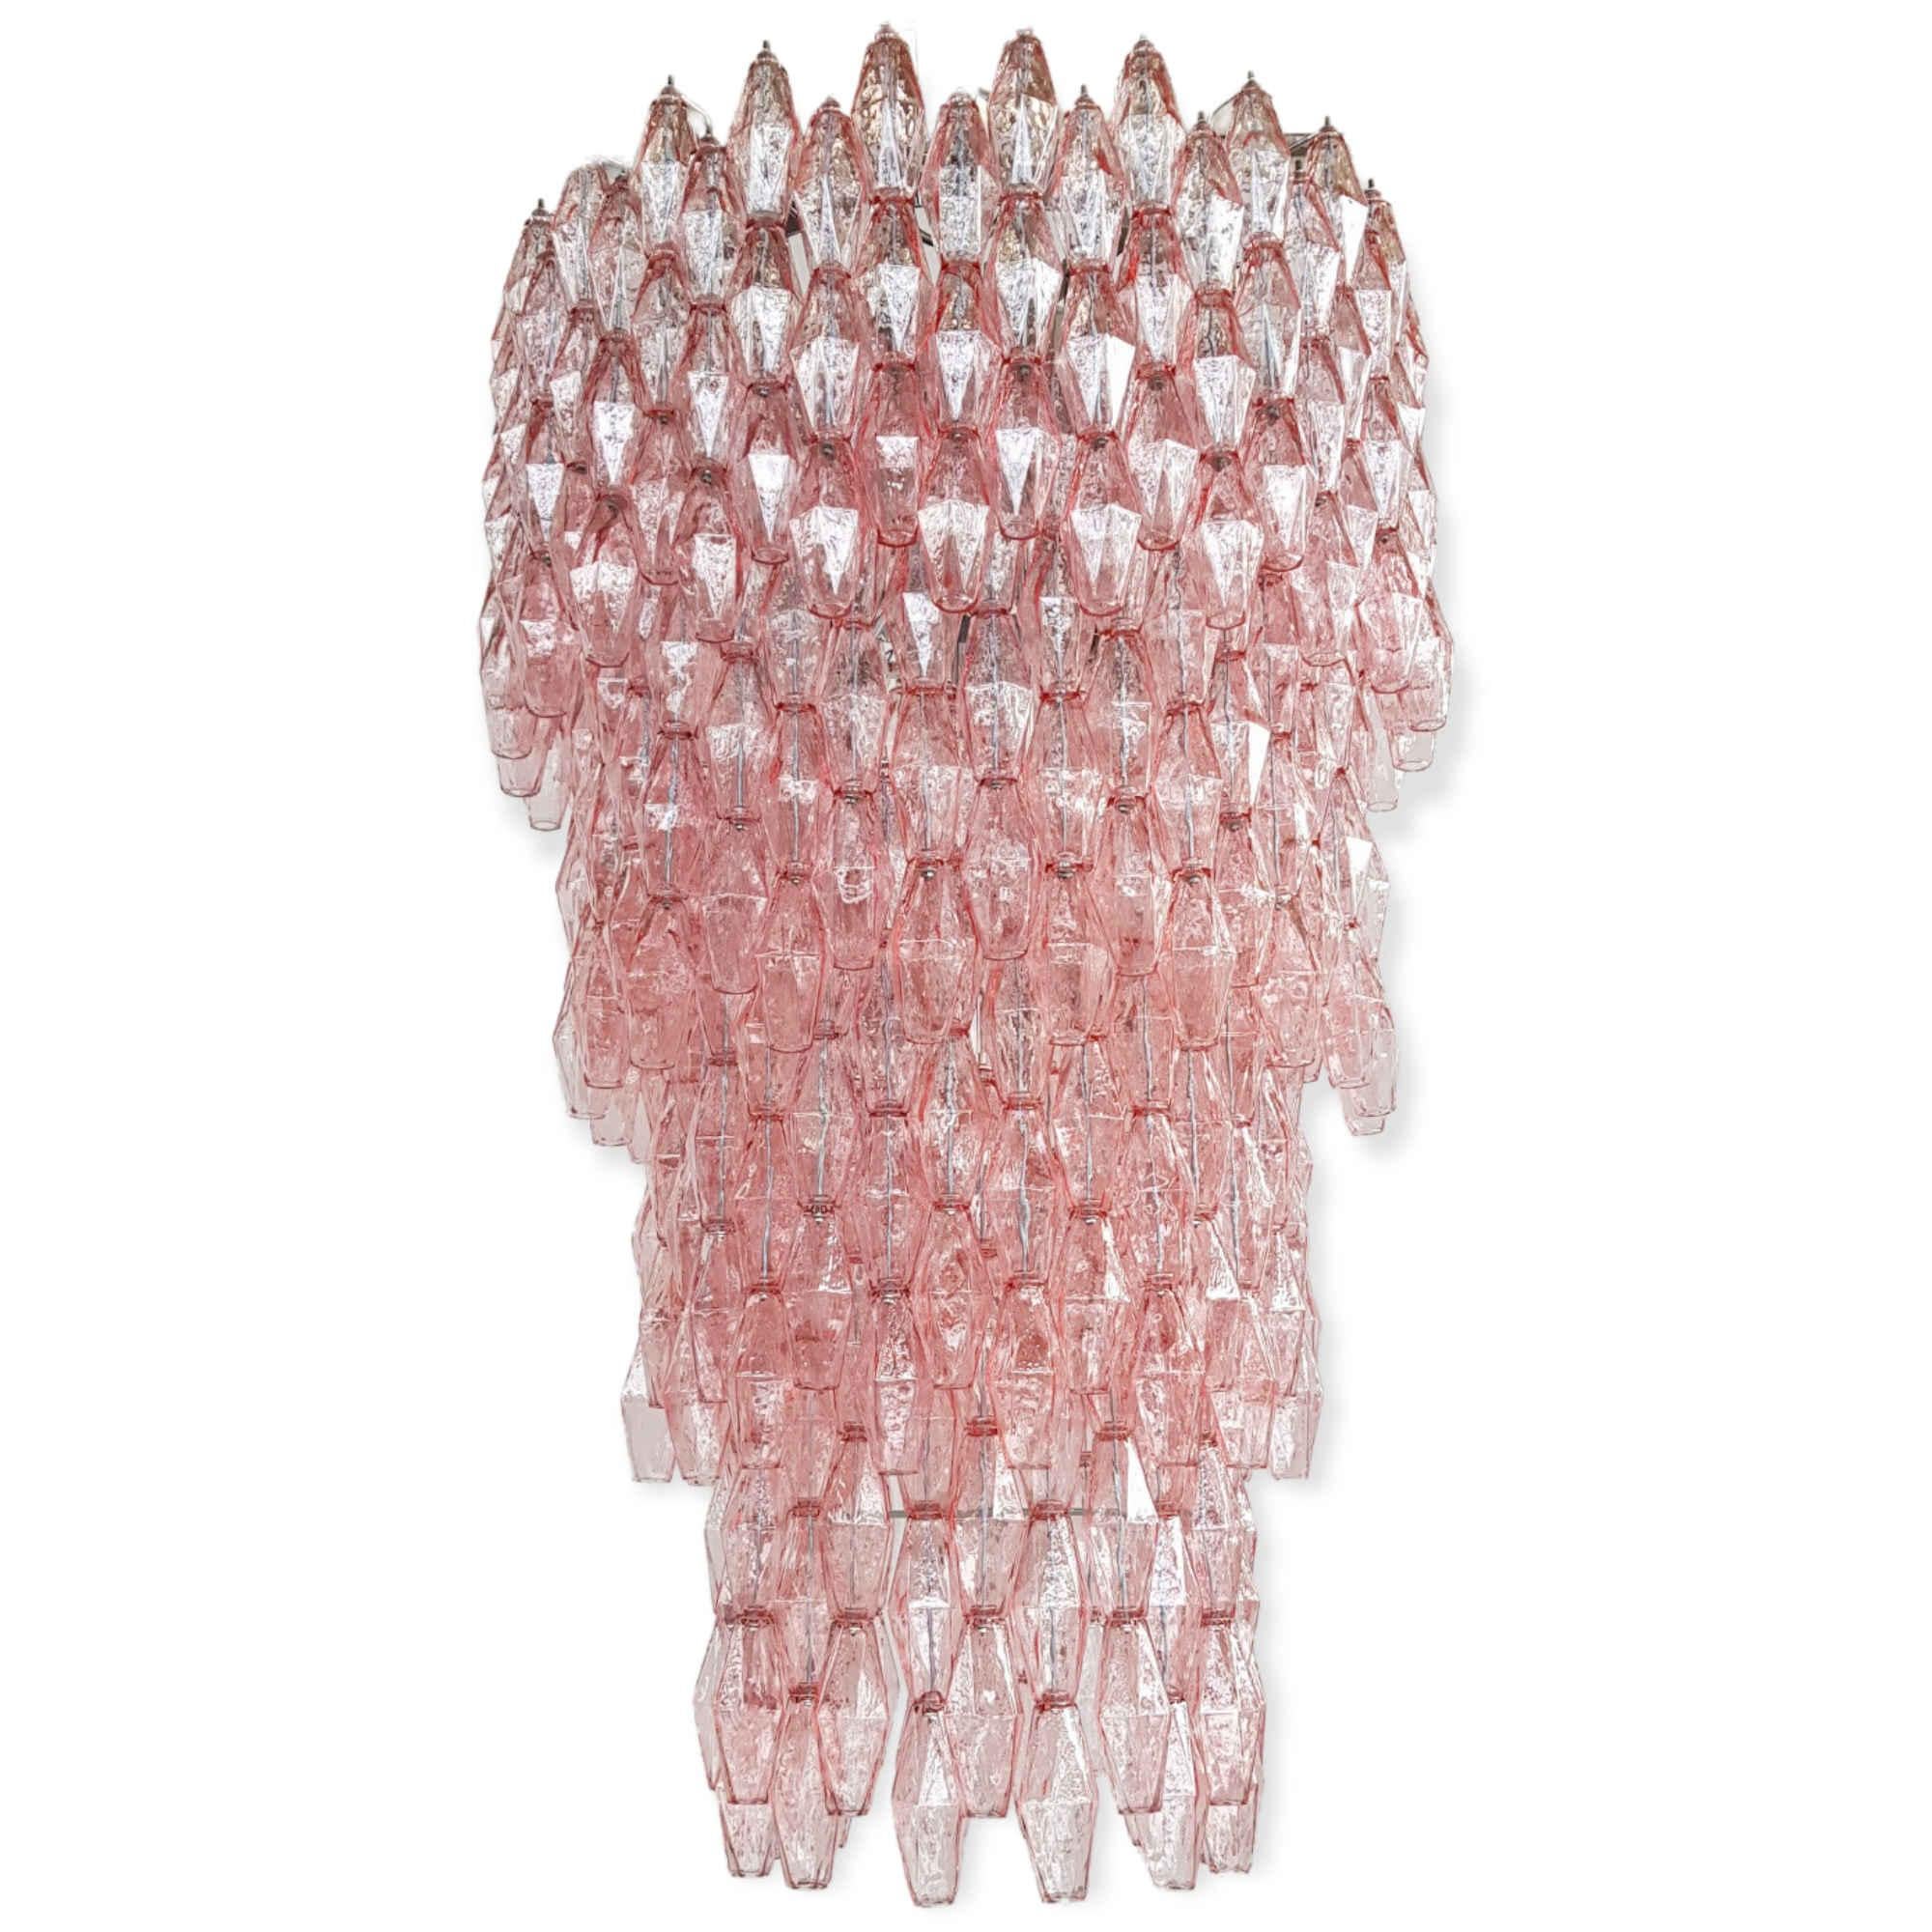 Oversized Italian chandelier with over 500 pink polyhedron / polyhedral shaped Murano glasses and a round frosted diffuser, mounted on chrome finish frame / Made in Italy
12 lights / E26 or E27 type / max 60W each
Diameter: 33.5 inches, height 50